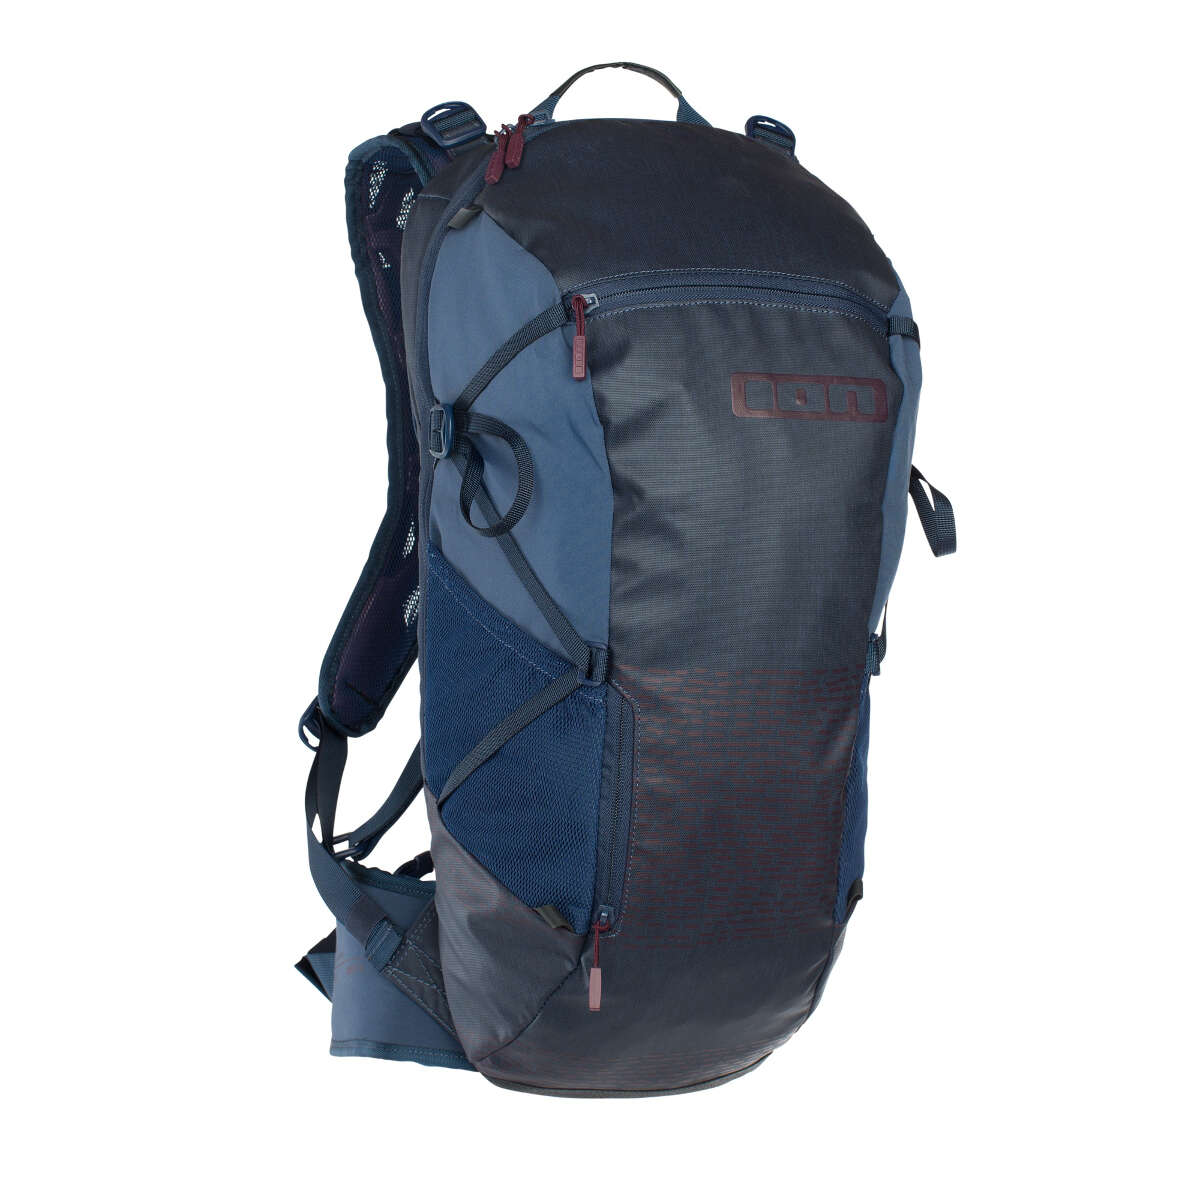 ION Backpack with Hydration System Compartment Rampart 16 Blue Nights, 16 L